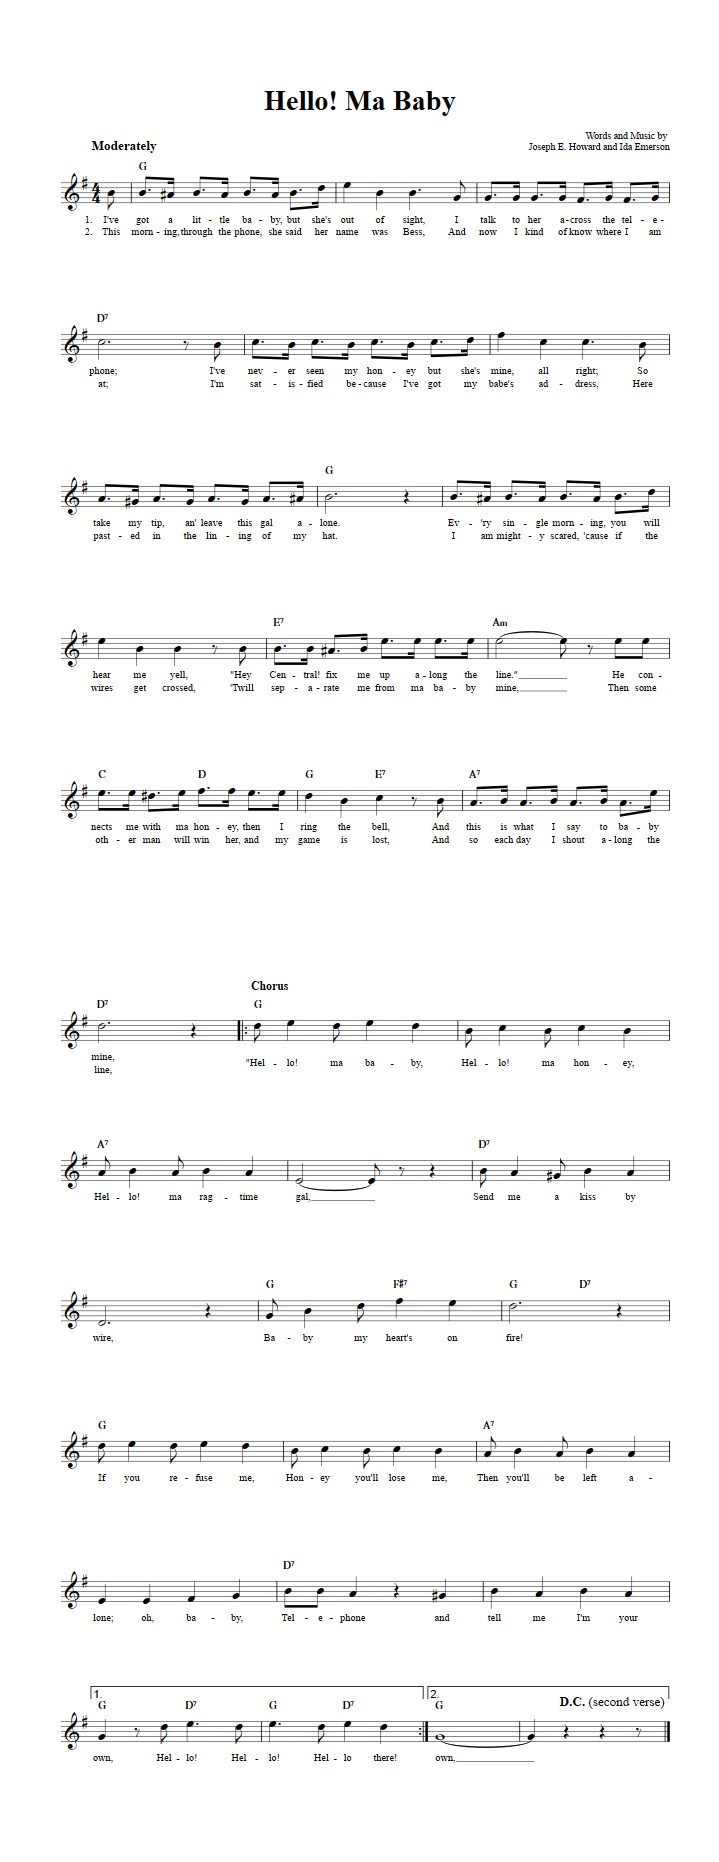 Hello! Ma Baby Sheet Music for Clarinet, Trumpet, etc.